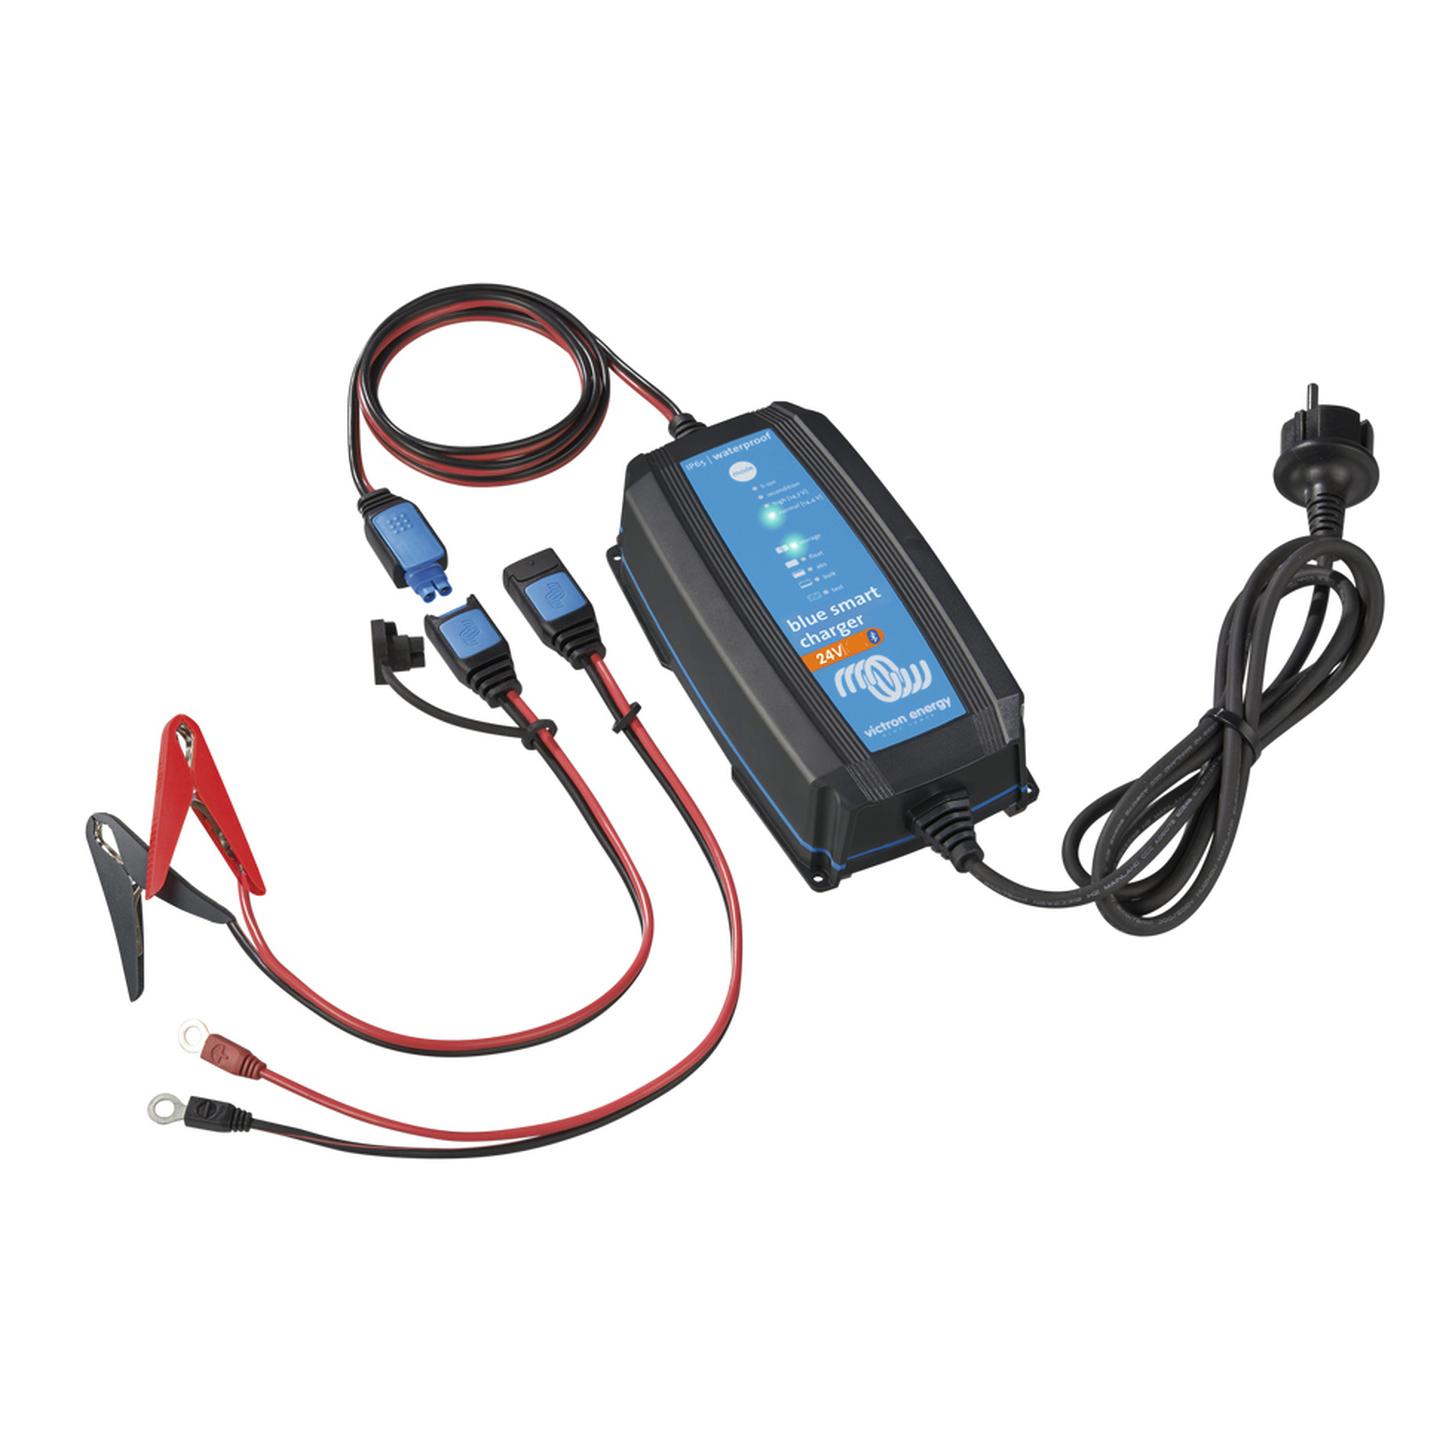 Victron Professional IP65 Blue Smart Charger 24V 13A with Bluetooth and DC Connector